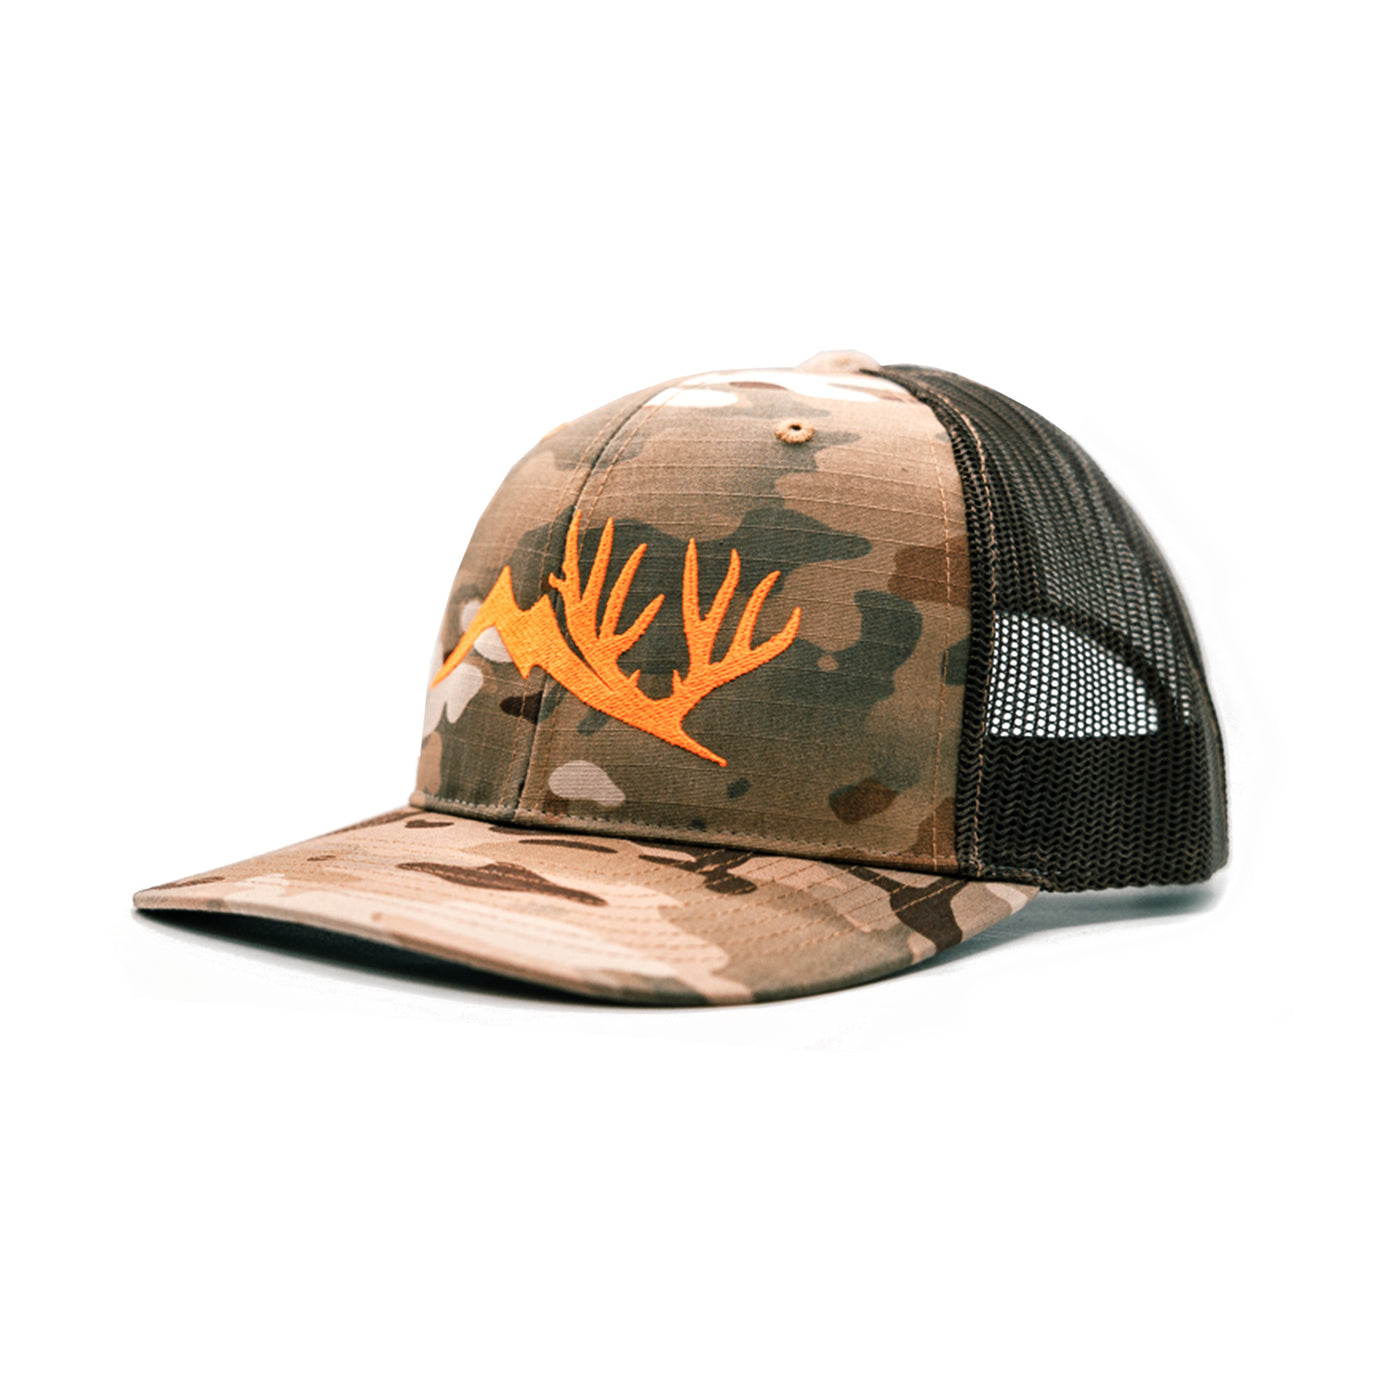 Ball Cap with Camo brim and Forehead with Altitude Outdoors Orange logo, Black netting